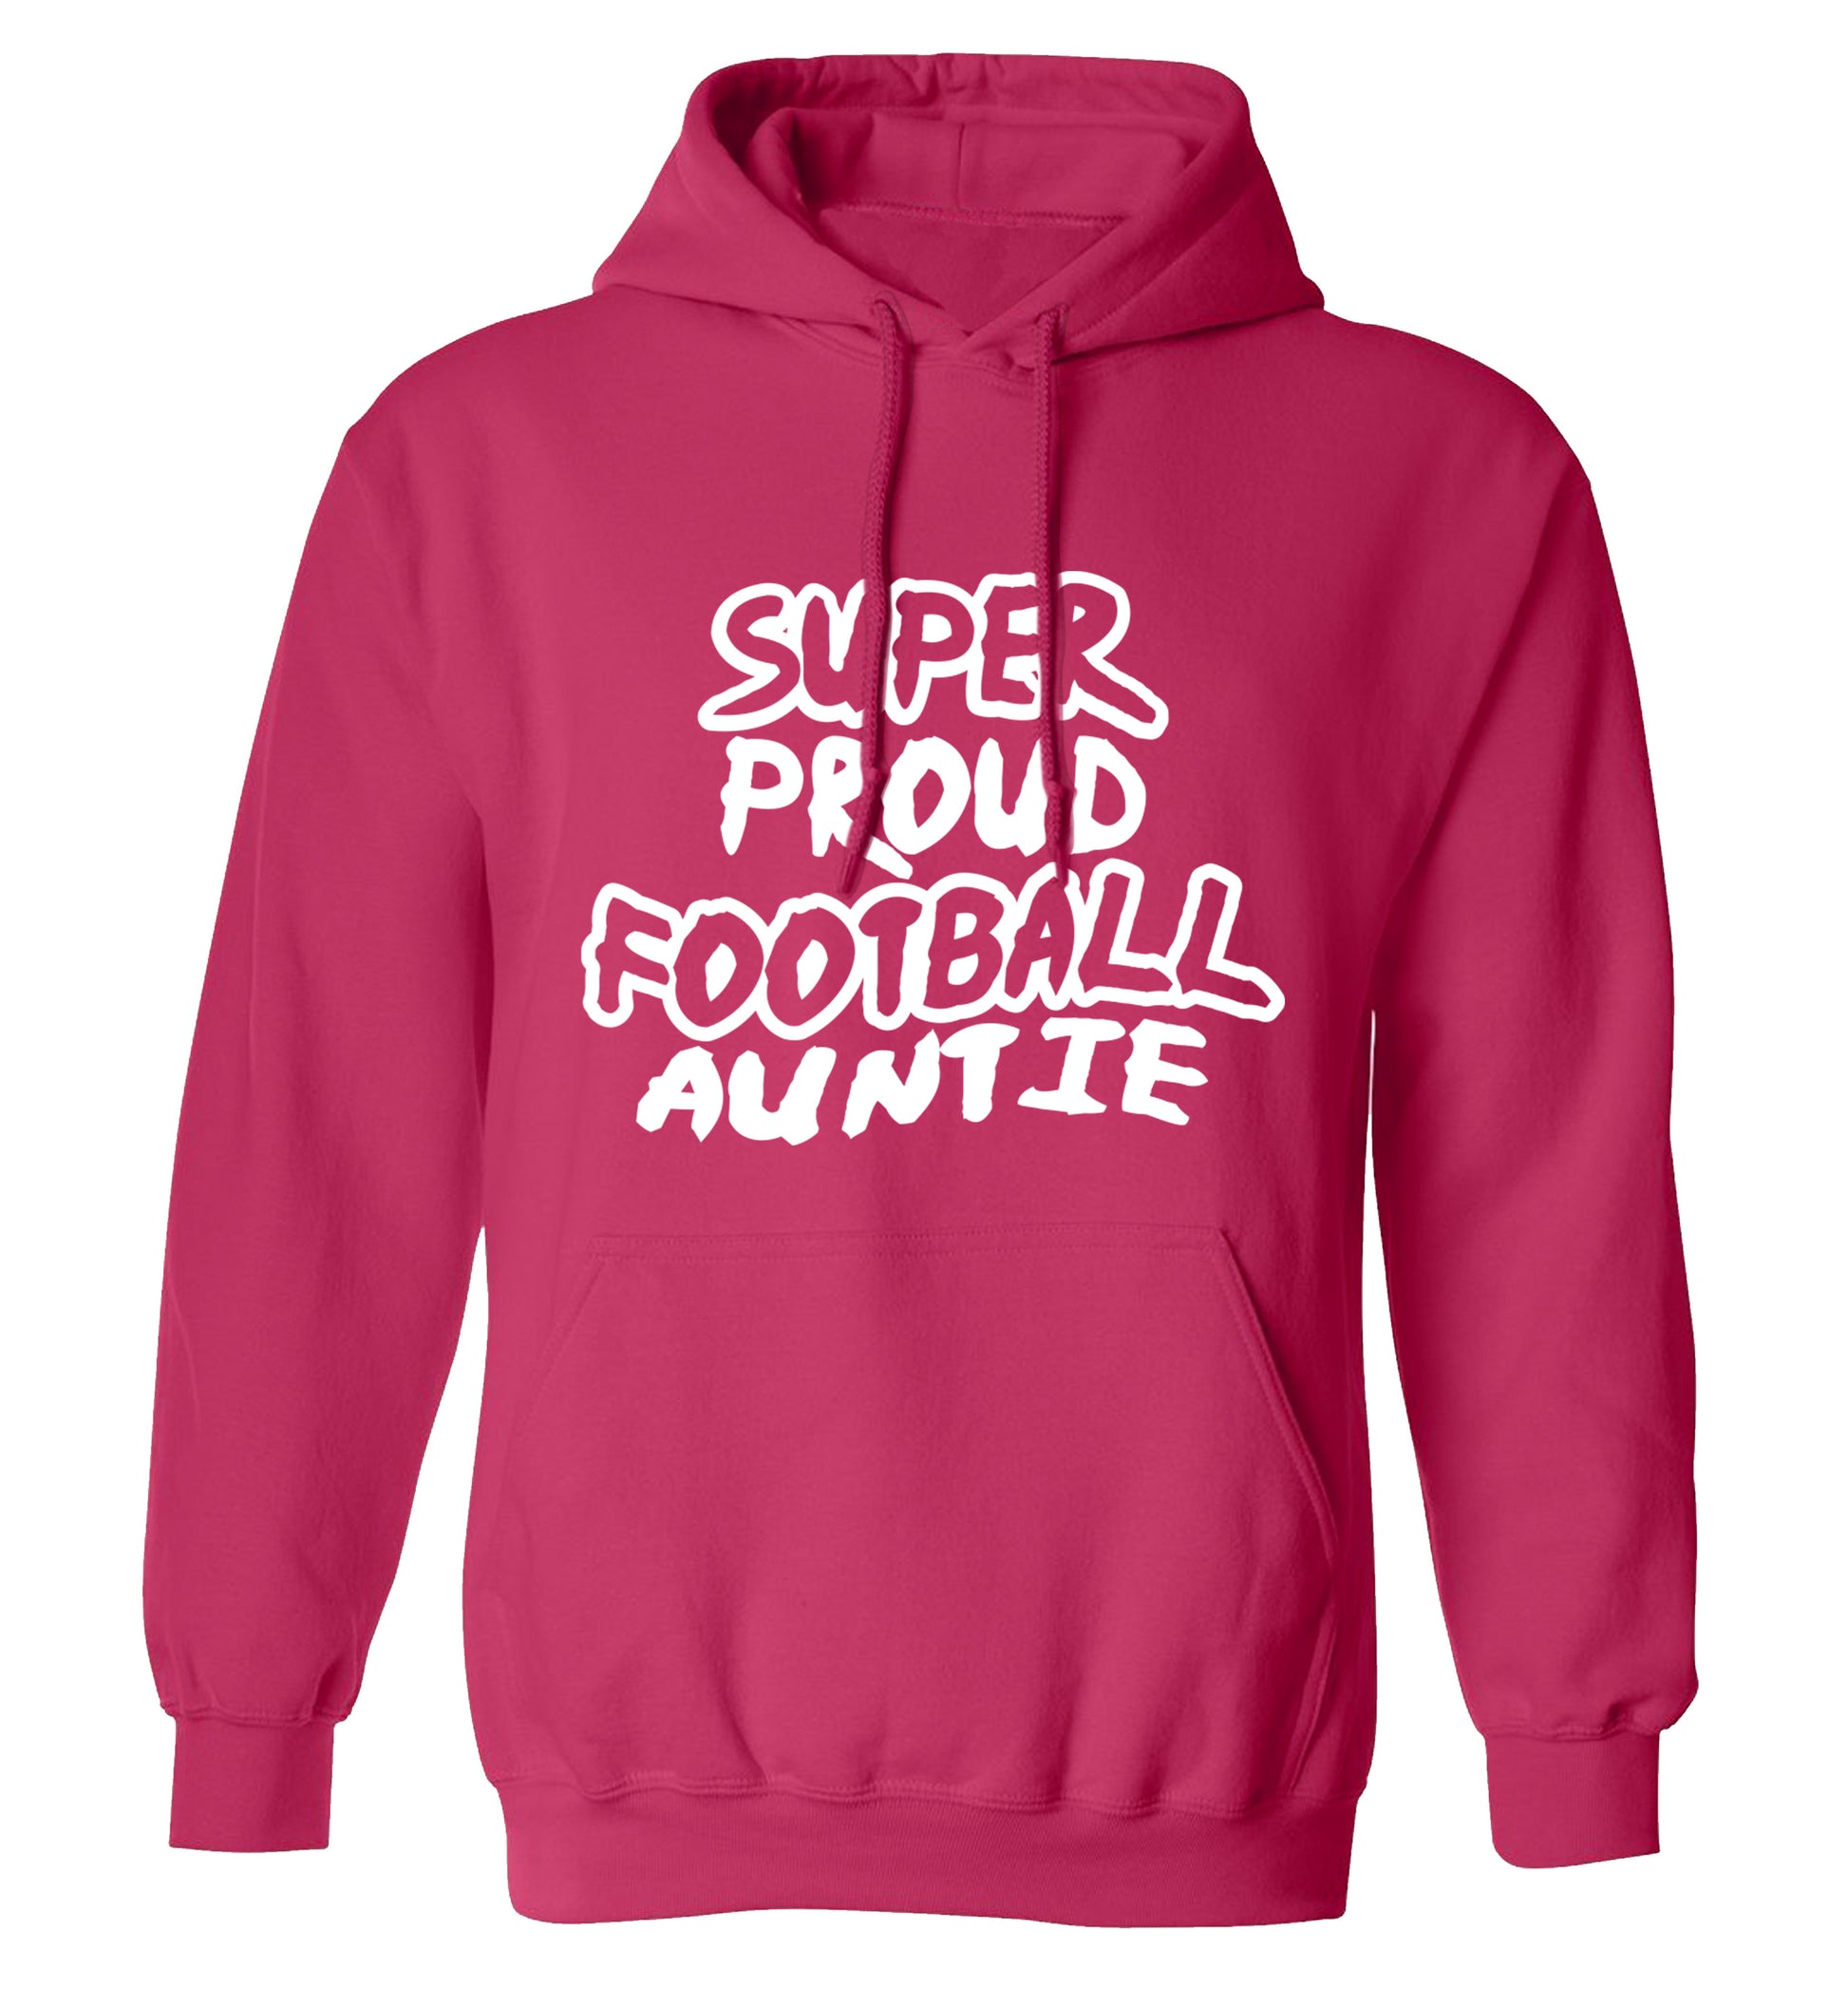 Super proud football auntie adults unisexpink hoodie 2XL